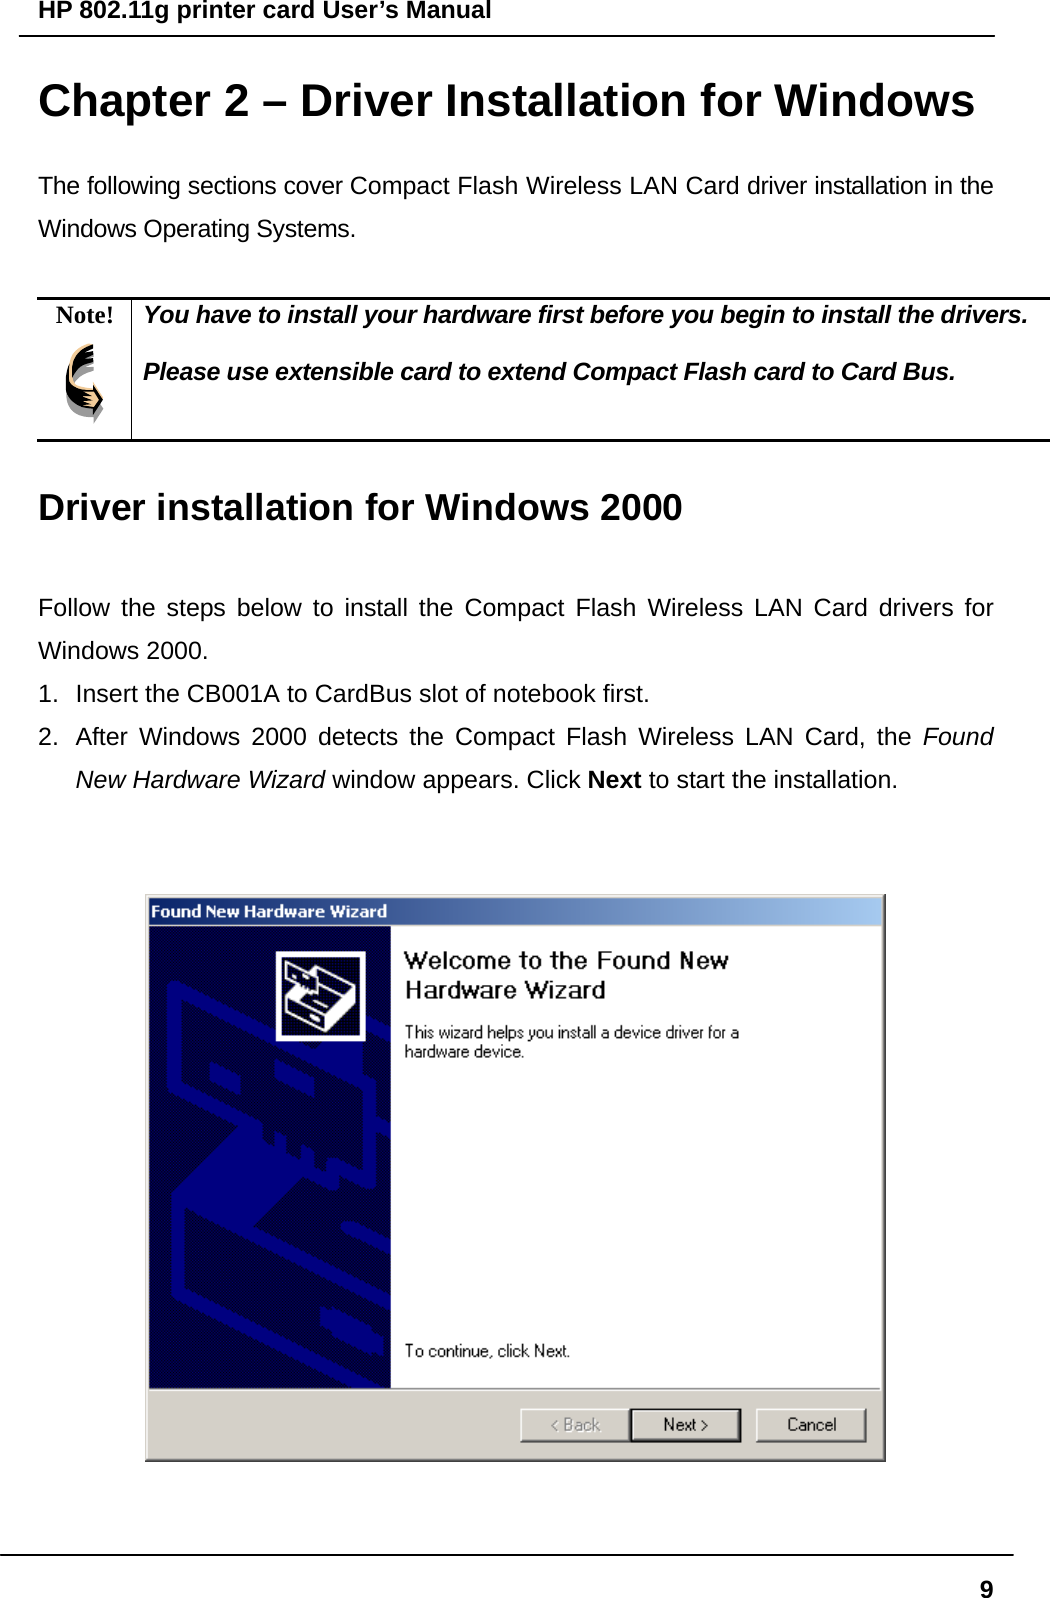 HP 802.11g printer card User’s Manual  9Chapter 2 – Driver Installation for Windows The following sections cover Compact Flash Wireless LAN Card driver installation in the Windows Operating Systems.  Note!  You have to install your hardware first before you begin to install the drivers.  Please use extensible card to extend Compact Flash card to Card Bus.  Driver installation for Windows 2000  Follow the steps below to install the Compact Flash Wireless LAN Card drivers for Windows 2000. 1.  Insert the CB001A to CardBus slot of notebook first.   2.  After Windows 2000 detects the Compact Flash Wireless LAN Card, the Found New Hardware Wizard window appears. Click Next to start the installation.      